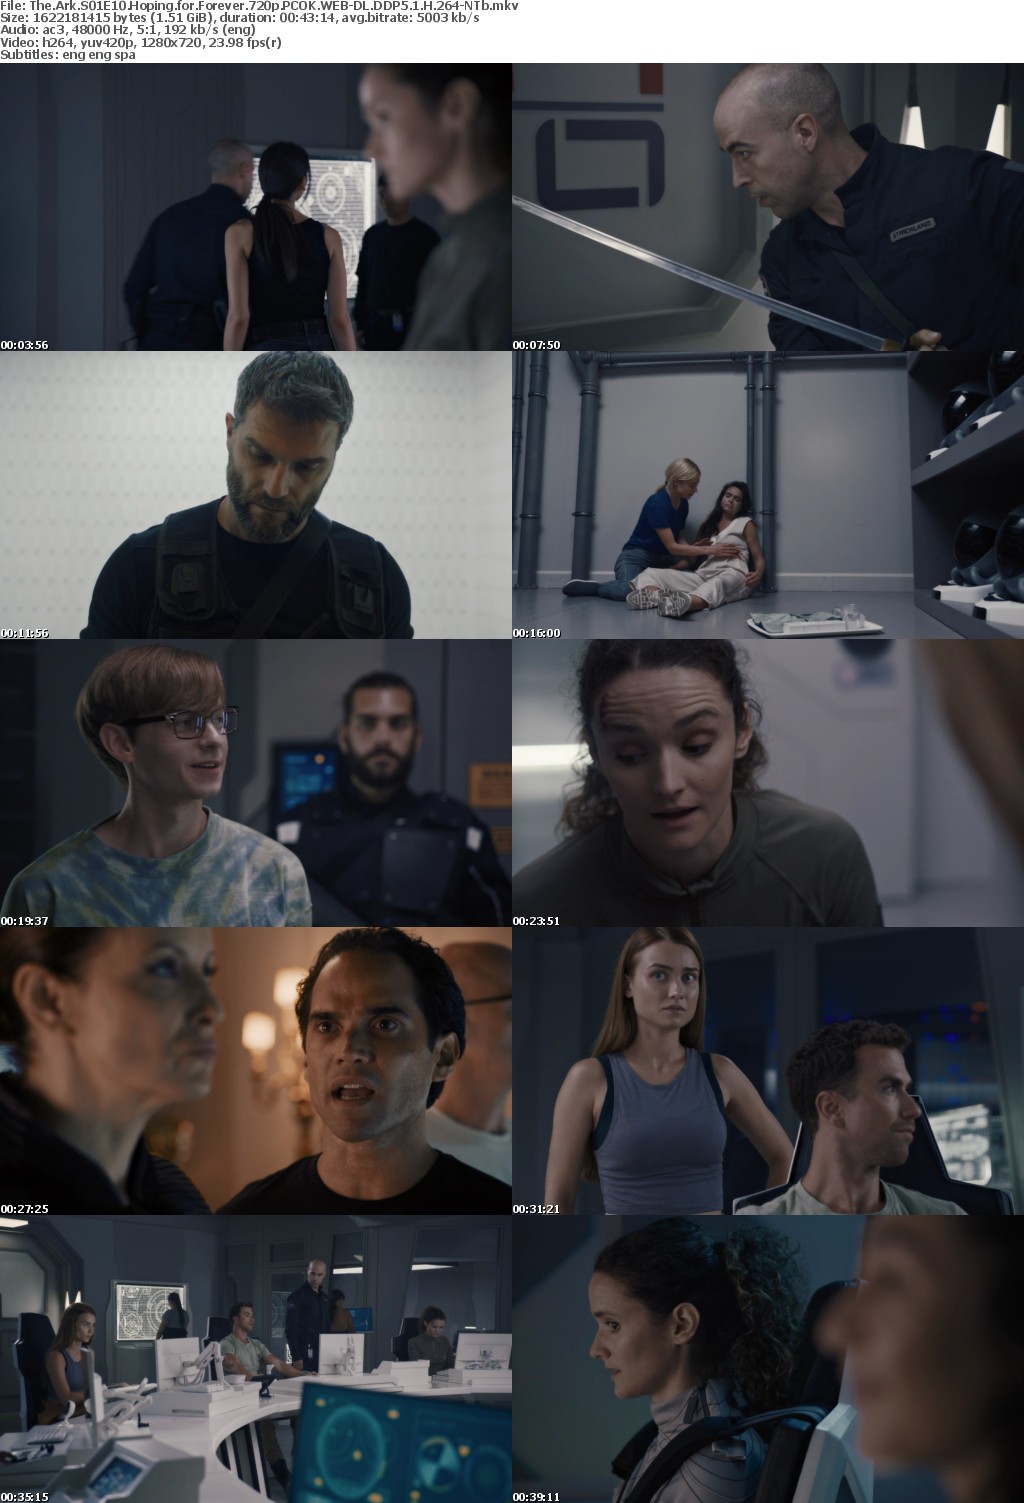 The Ark S01E10 Hoping for Forever 720p PCOK WEBRip DDP5 1 x264-NTb